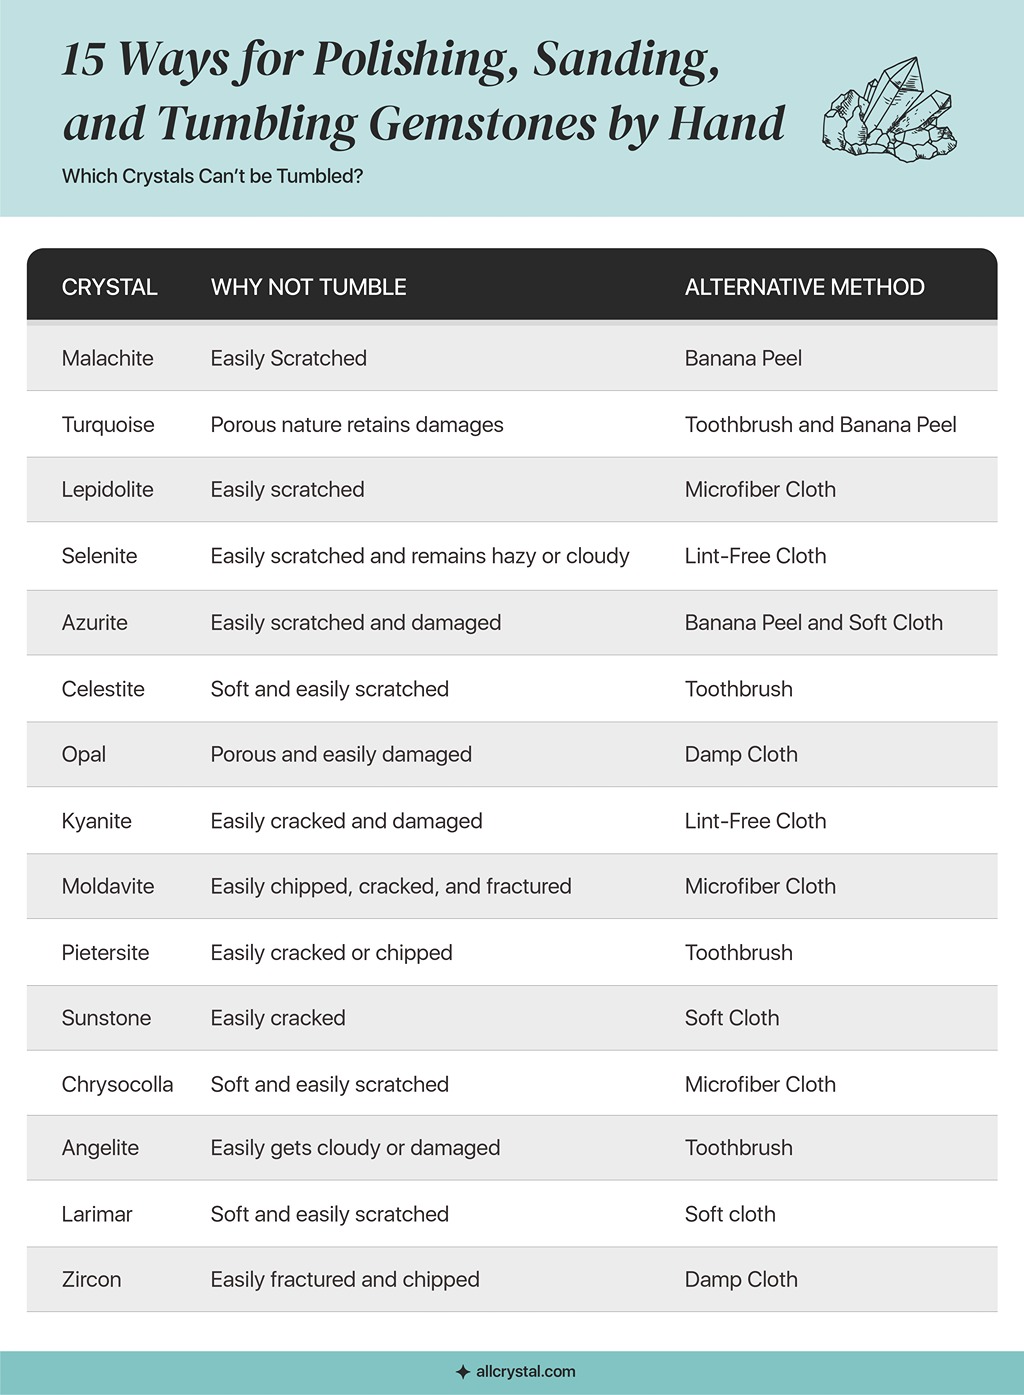 A graphic table for crystals that can not be polished